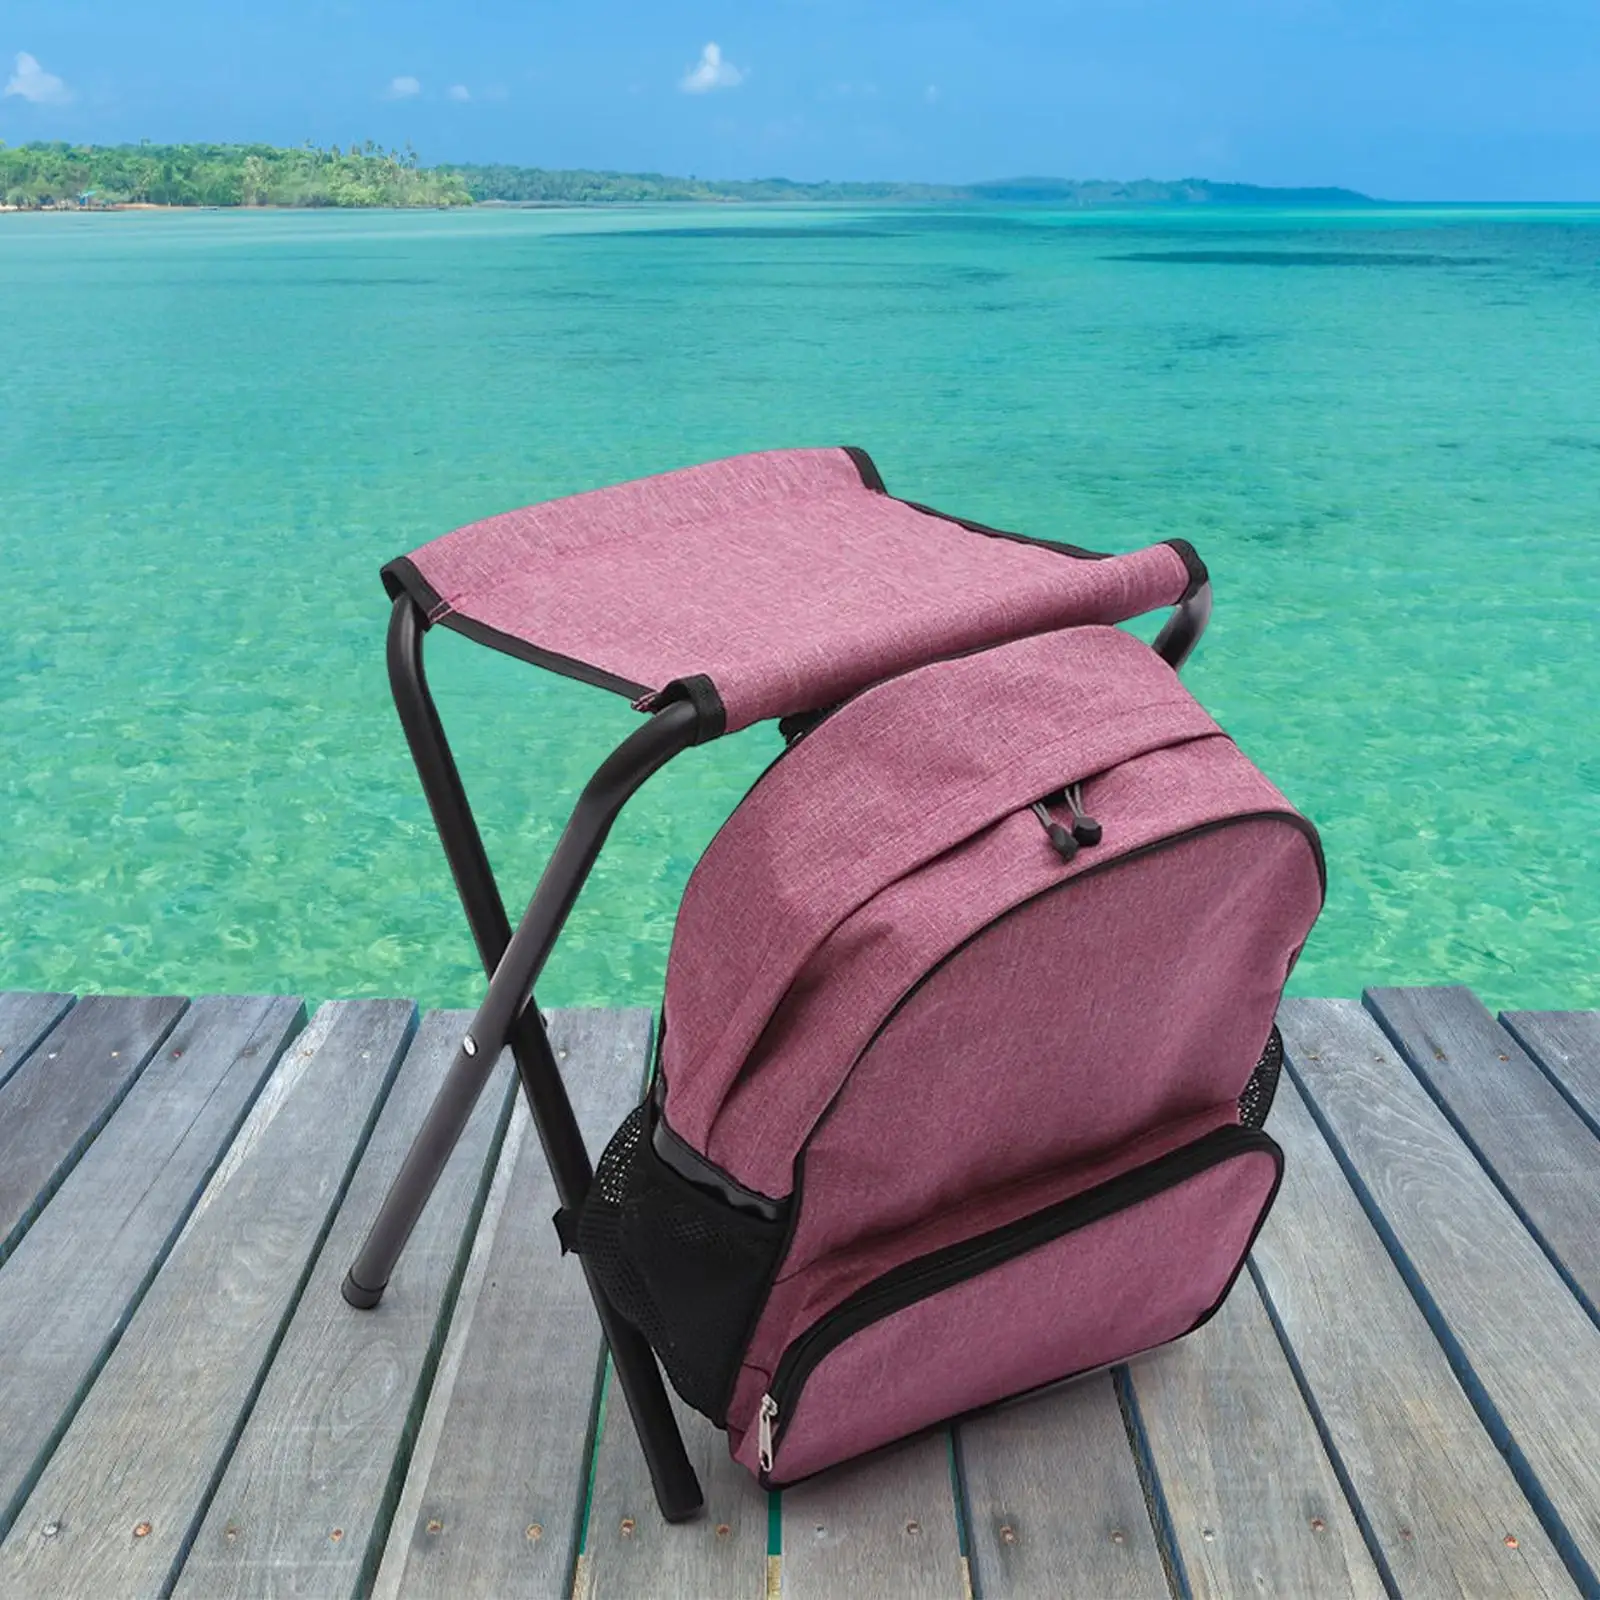 Fishing Seat Compact Camp Stool Multifunction Detachable Backpack Folding Stool with Bag for Hiking Beach BBQ Gardening Travel